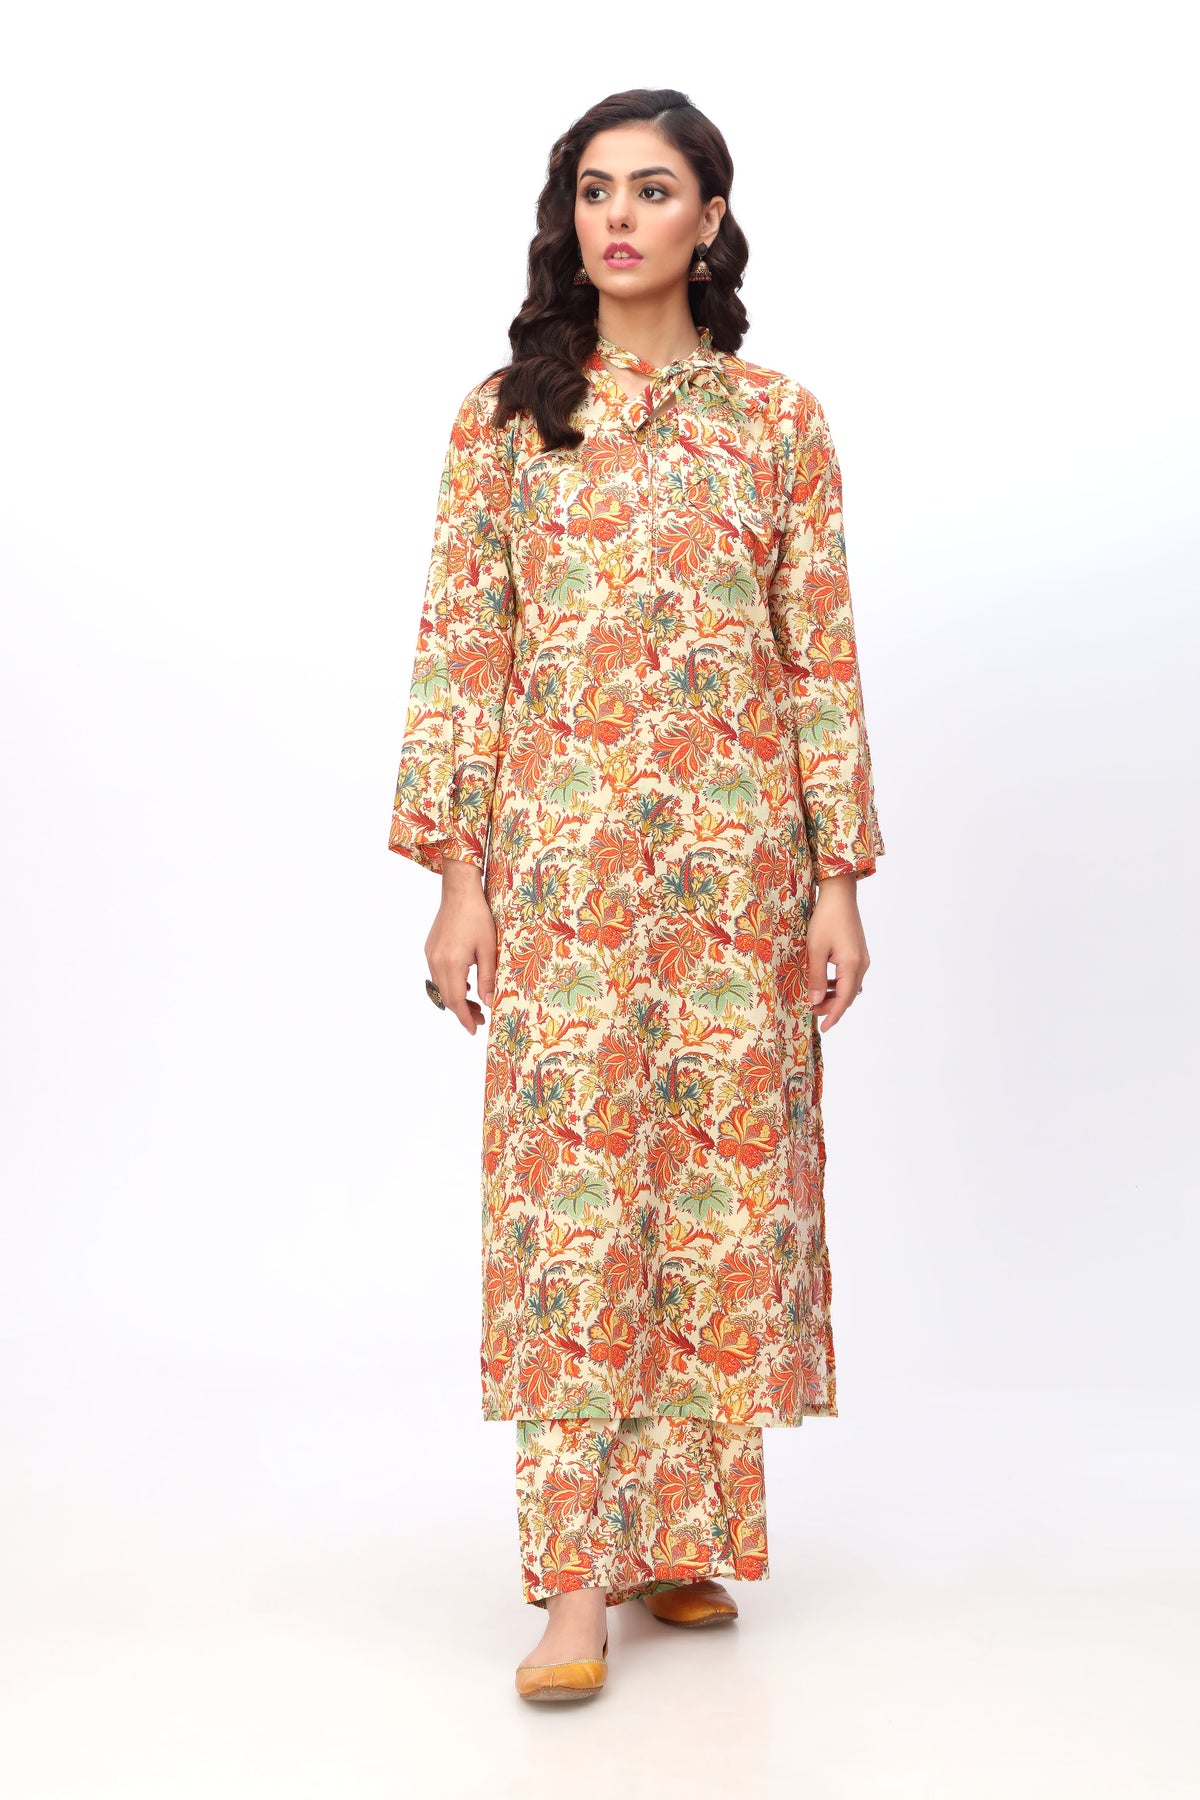 Earthy Floral in Multi coloured Printed Lawn fabric